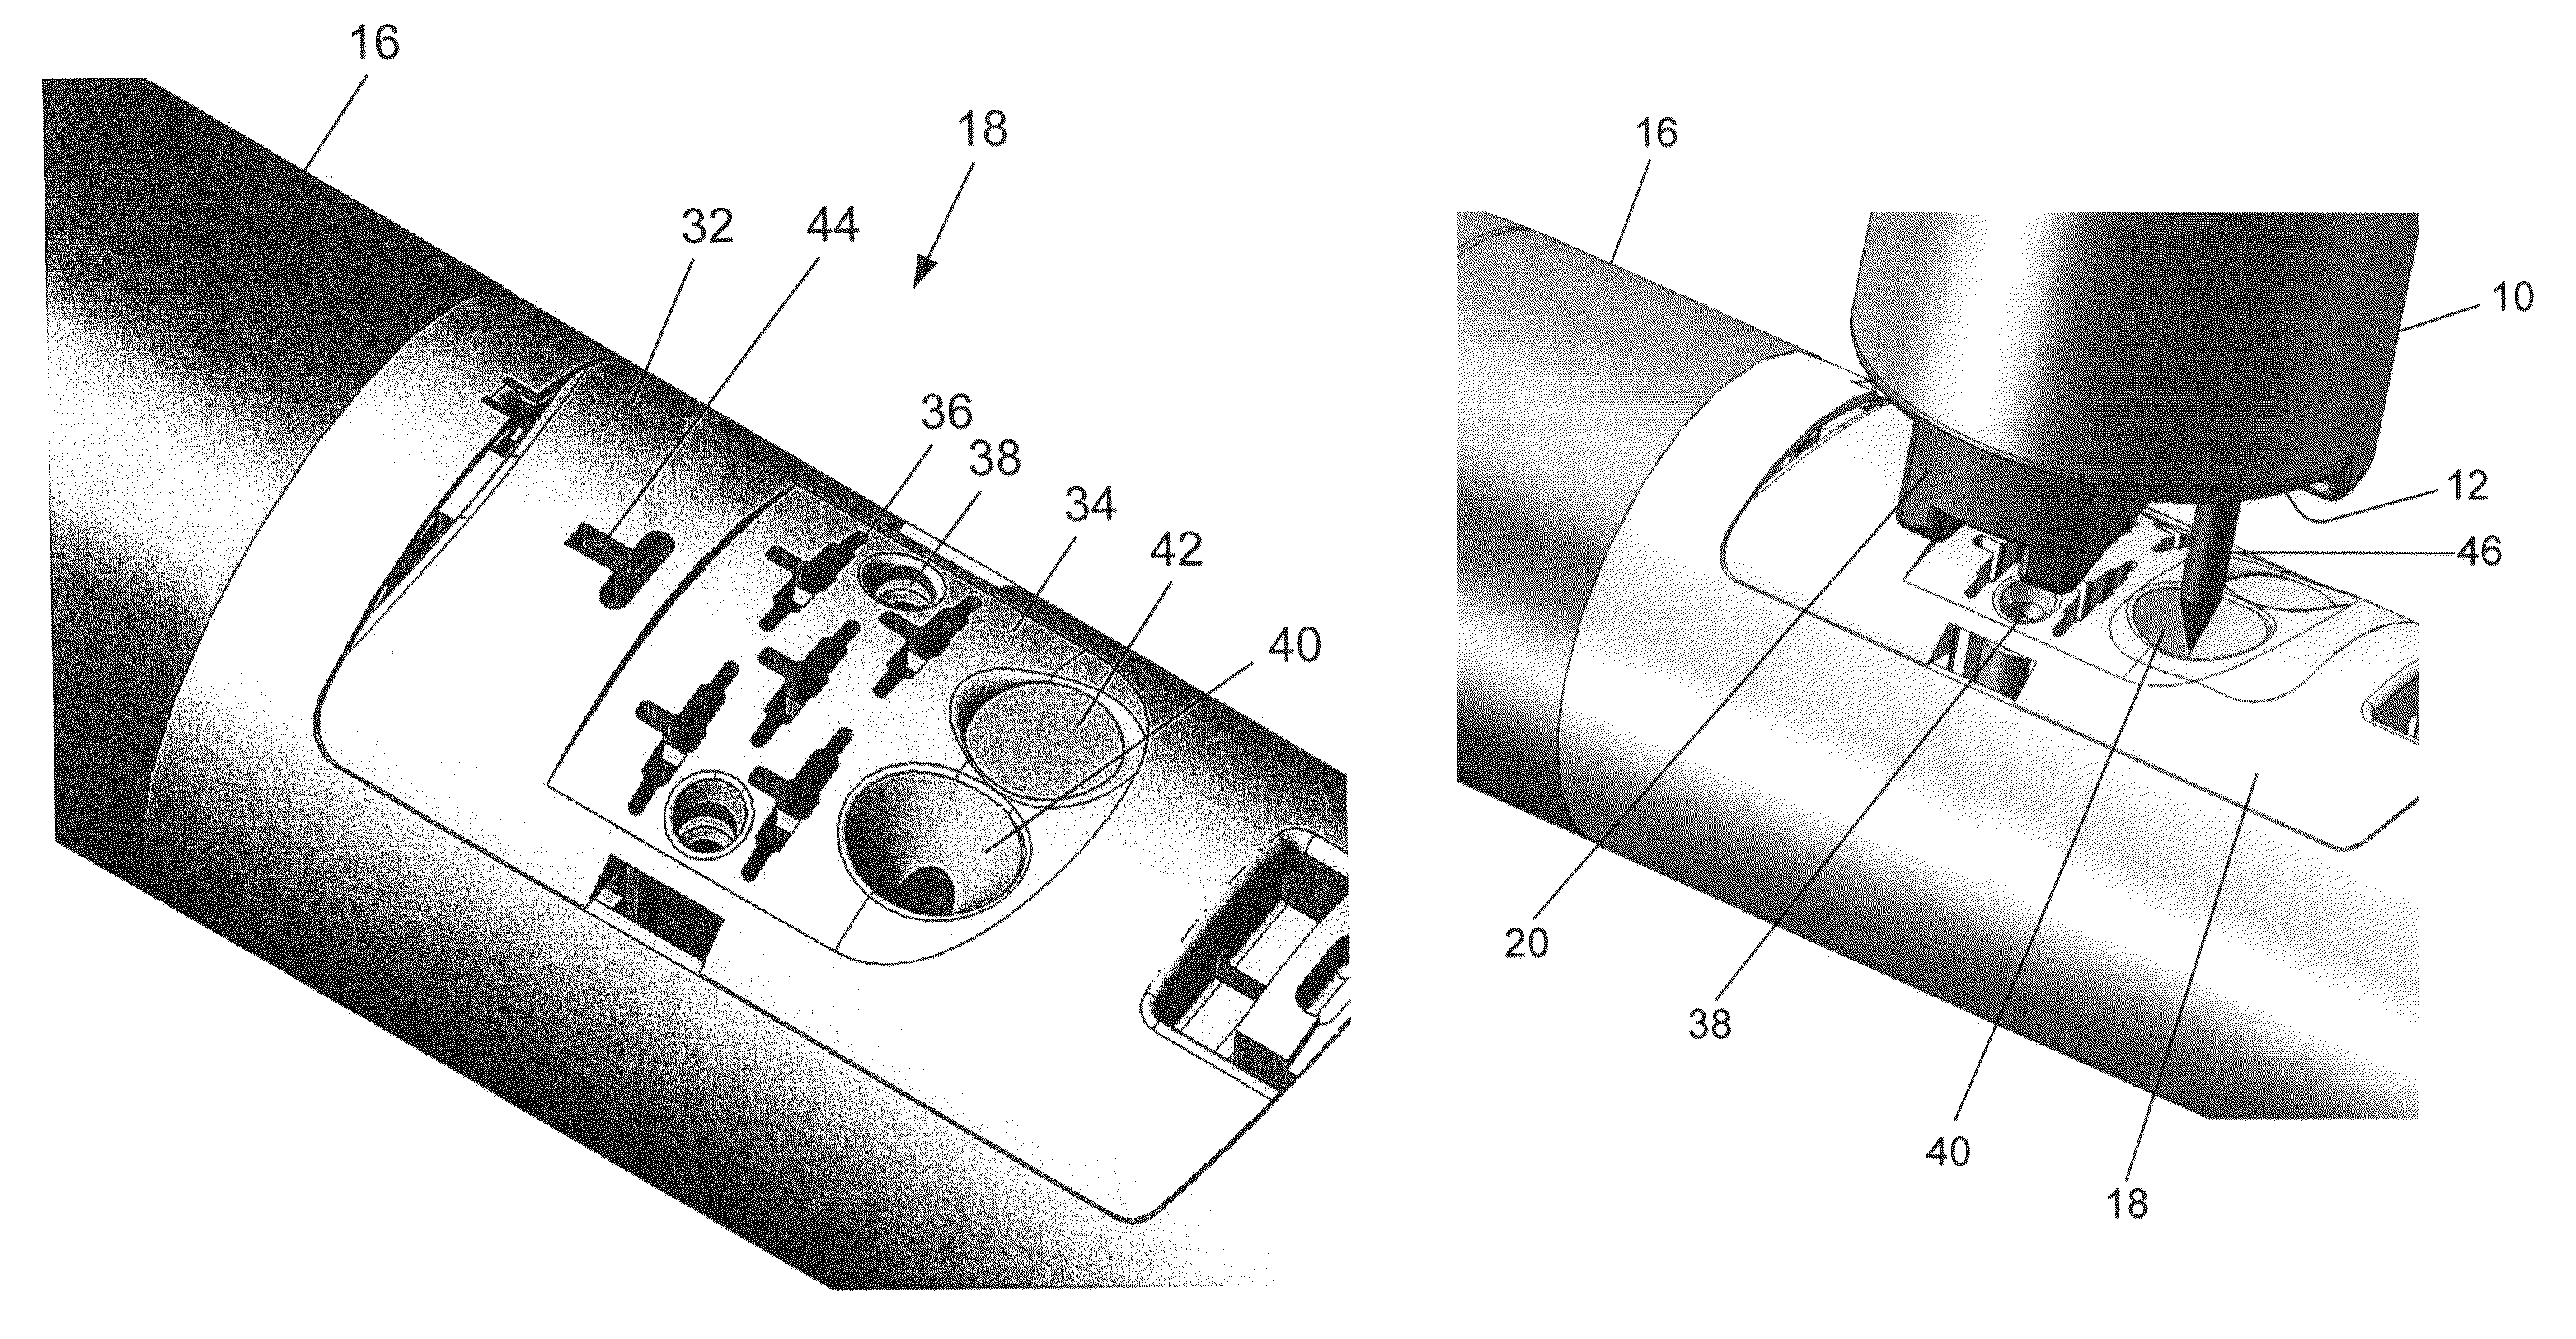 Medical device comprising alignment systems for bringing two portions into alignment